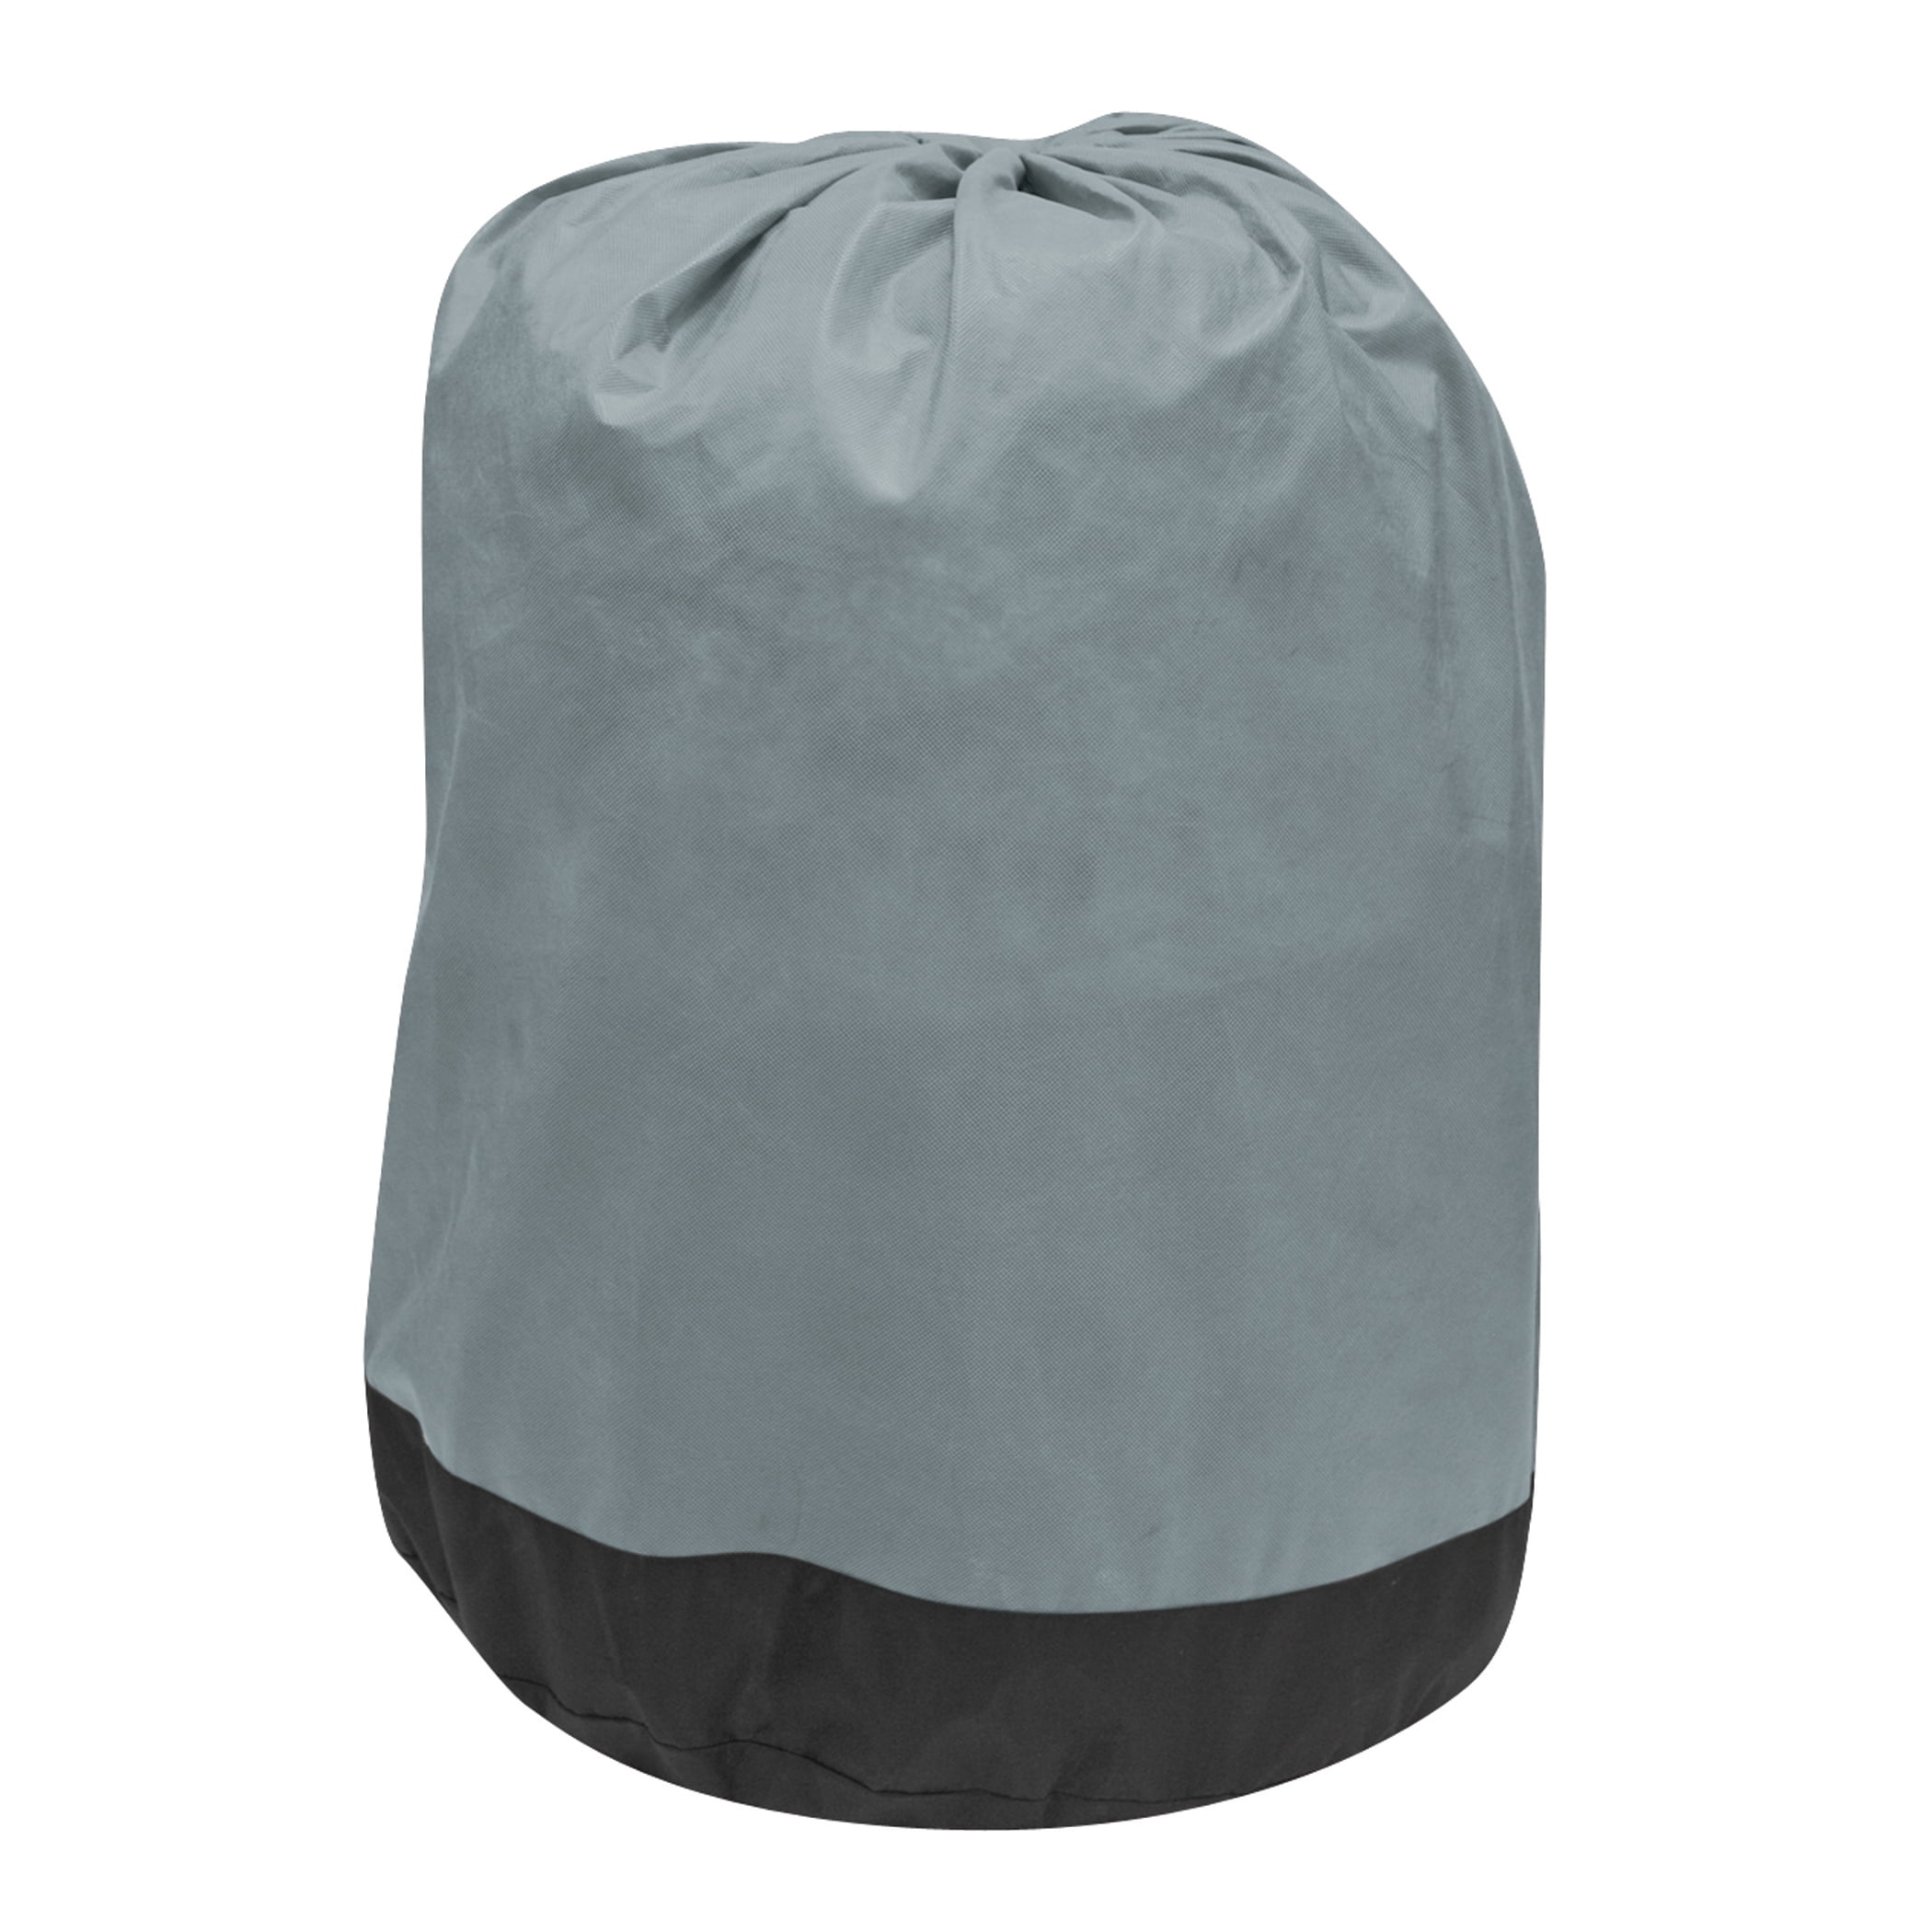 Grey/Snow White for Tab & Clam Shell Classic Accessories 80-298-163101-RT PolyPro III Teardrop Camping Trailer Cover 